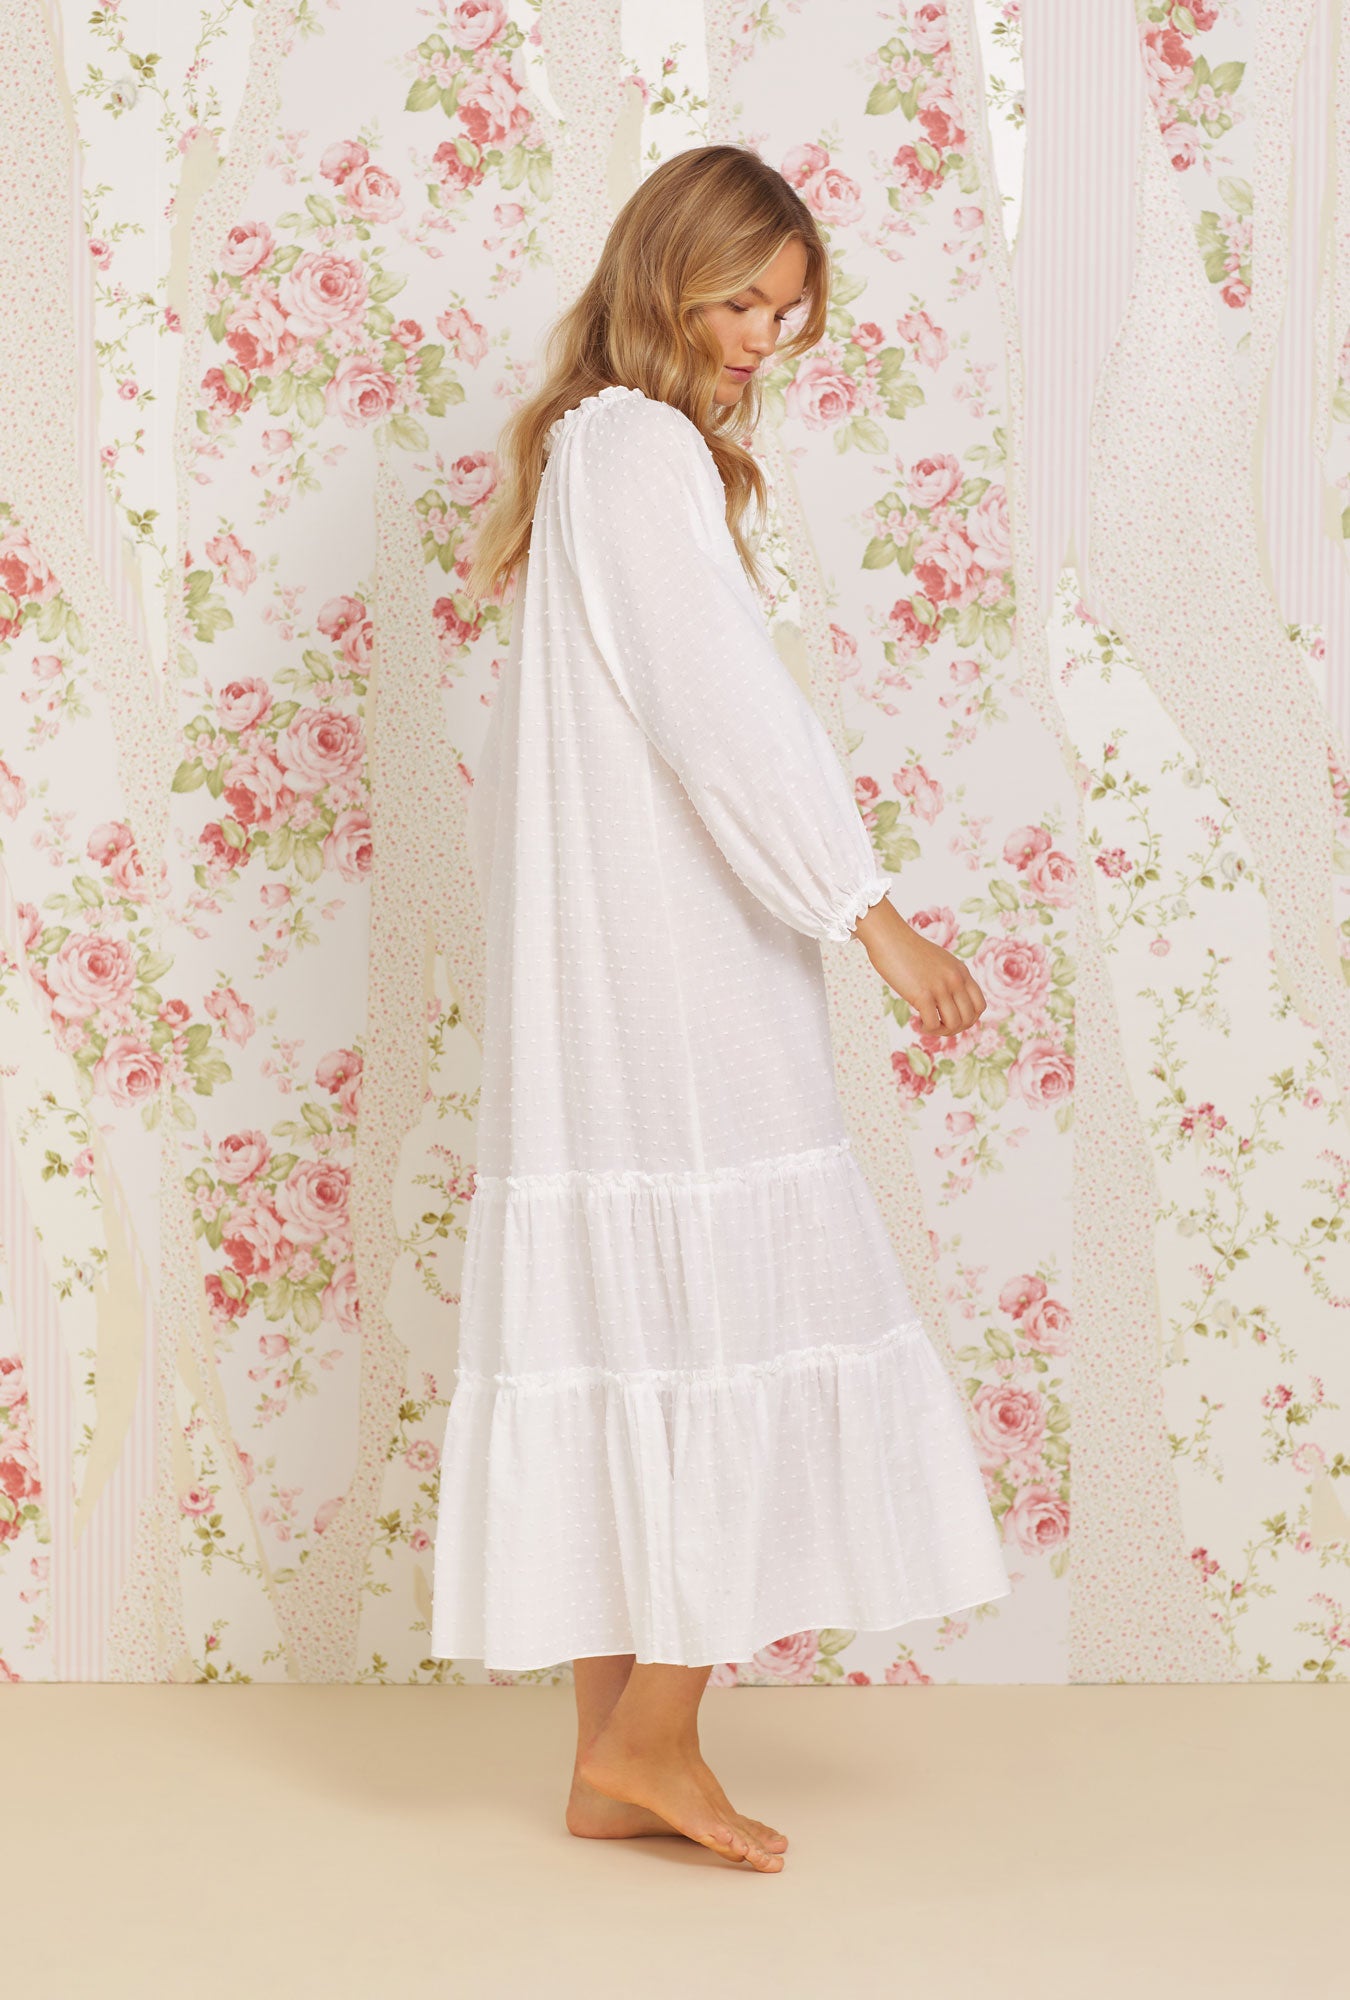 A lady wearing white long sleeve swiss dot bethany nightgown.